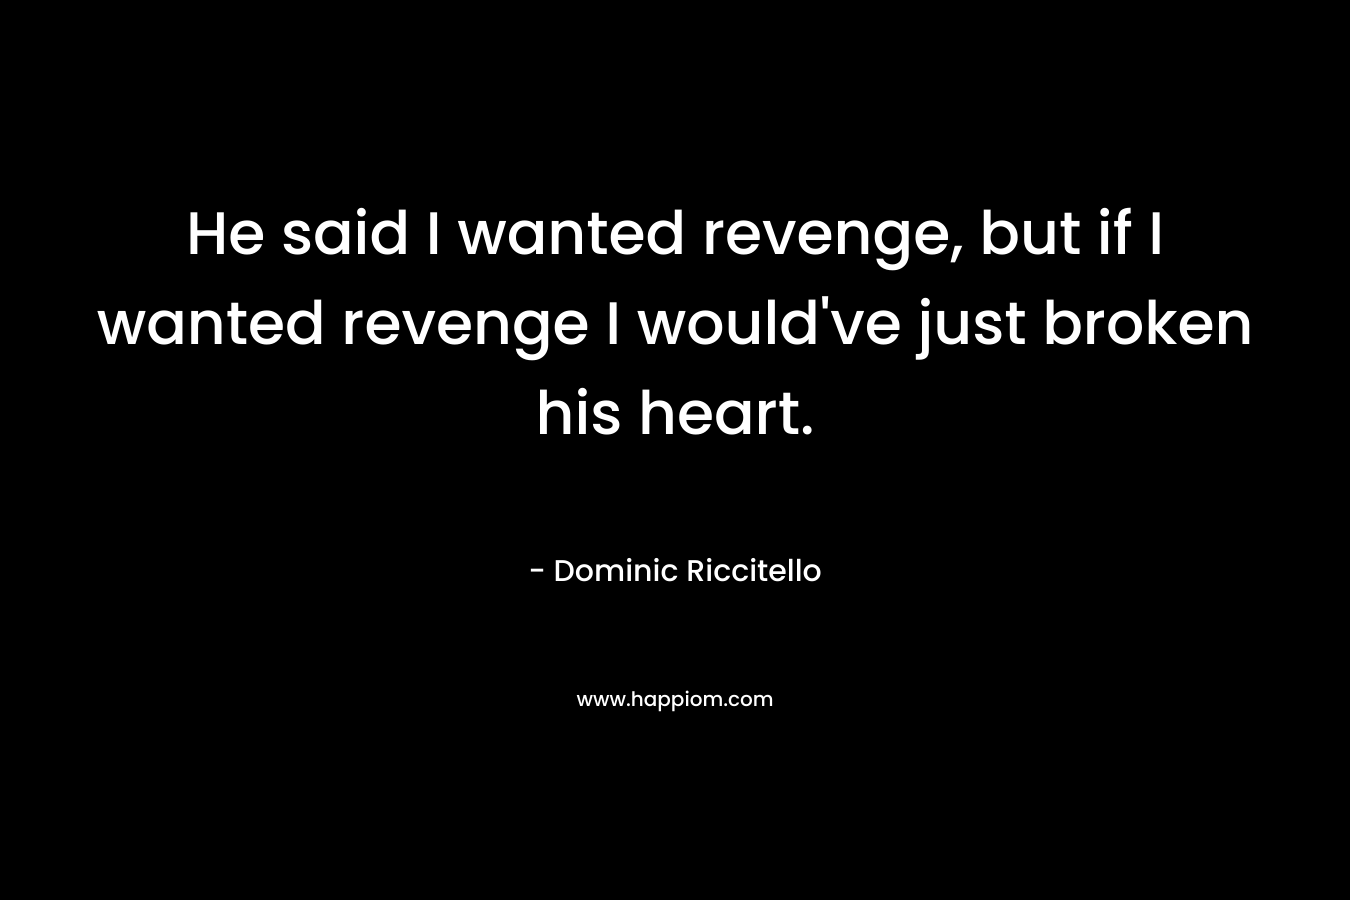 He said I wanted revenge, but if I wanted revenge I would've just broken his heart.